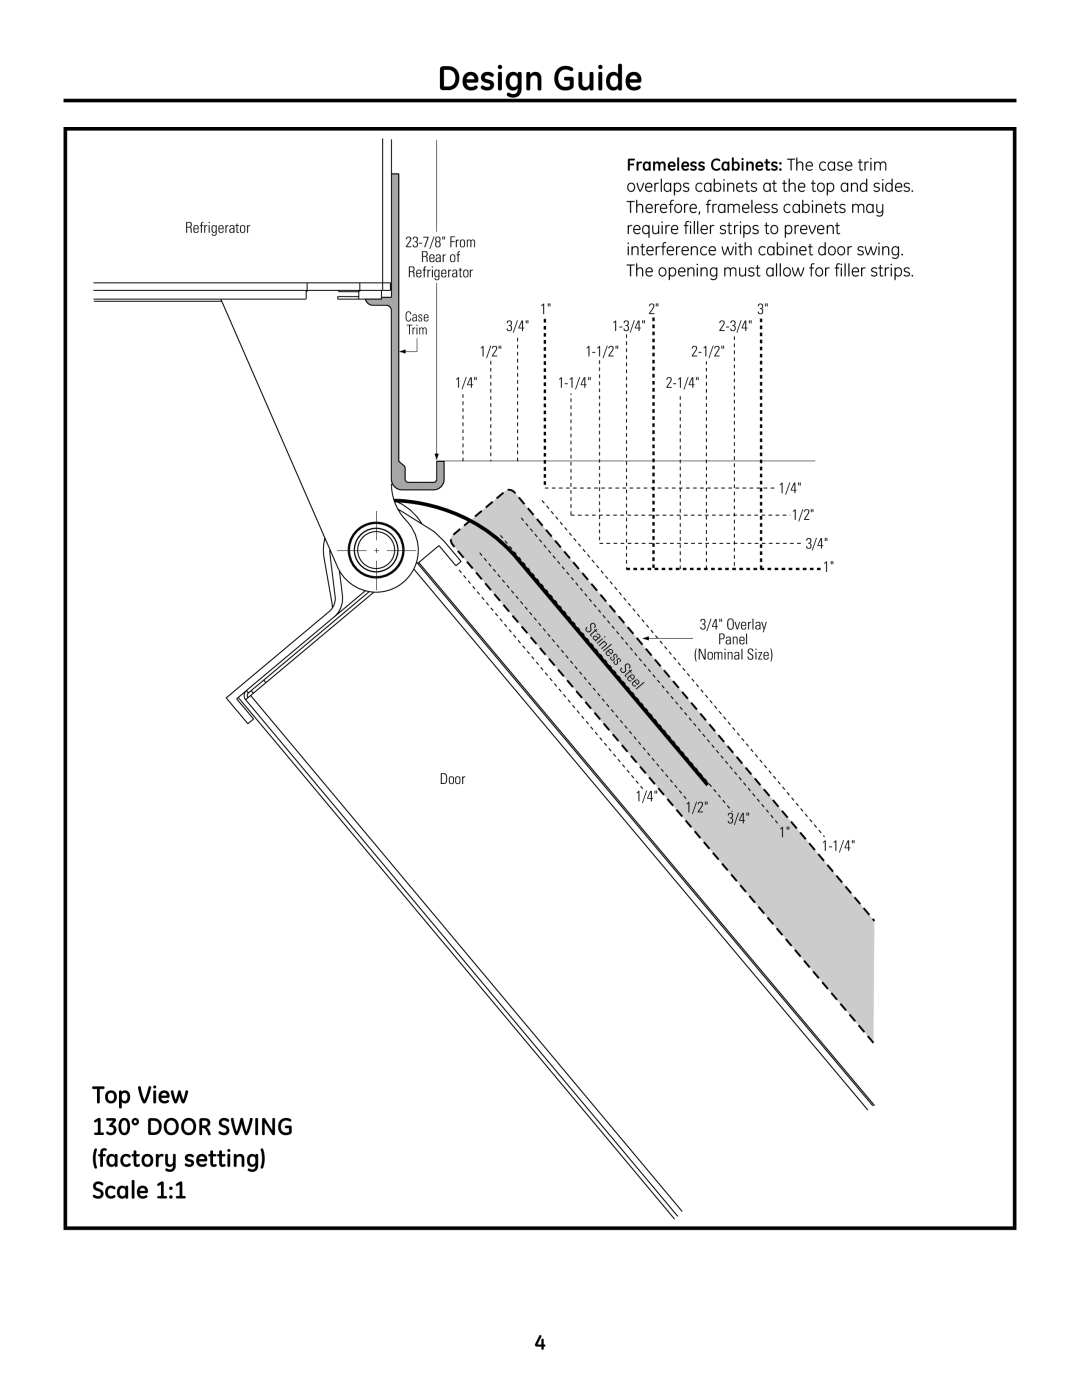 GE 49-60468-1 installation instructions Top View, DOOR SWING factory setting Scale, Design Guide 